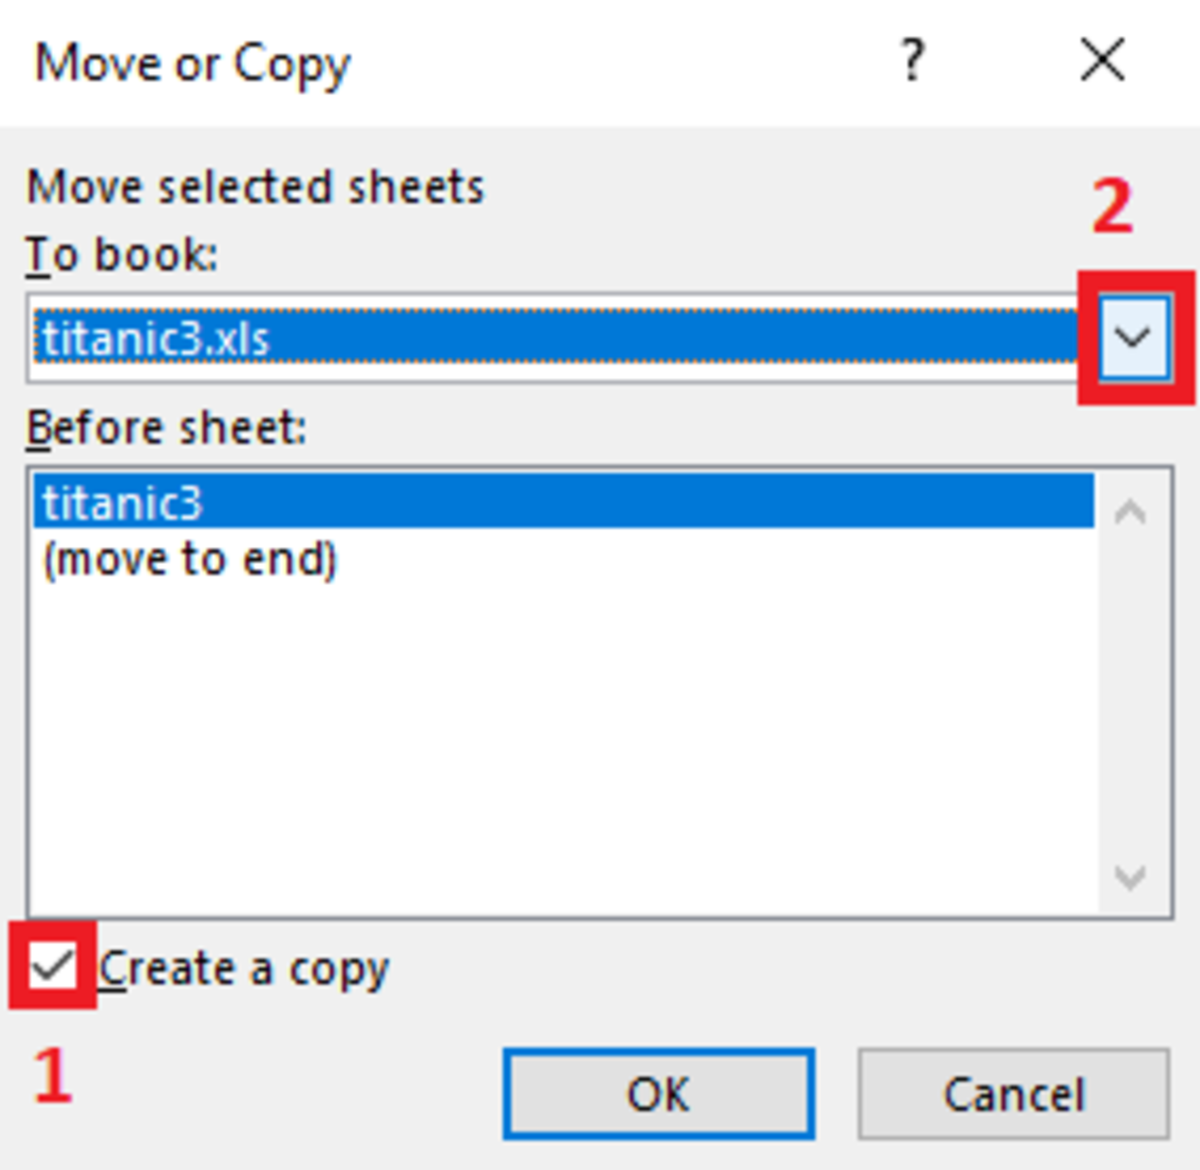 The move or copy window allows you to dictate what workbook your new copy will appear in. Additionally, you can select the order in which the worksheet tab will appear.  